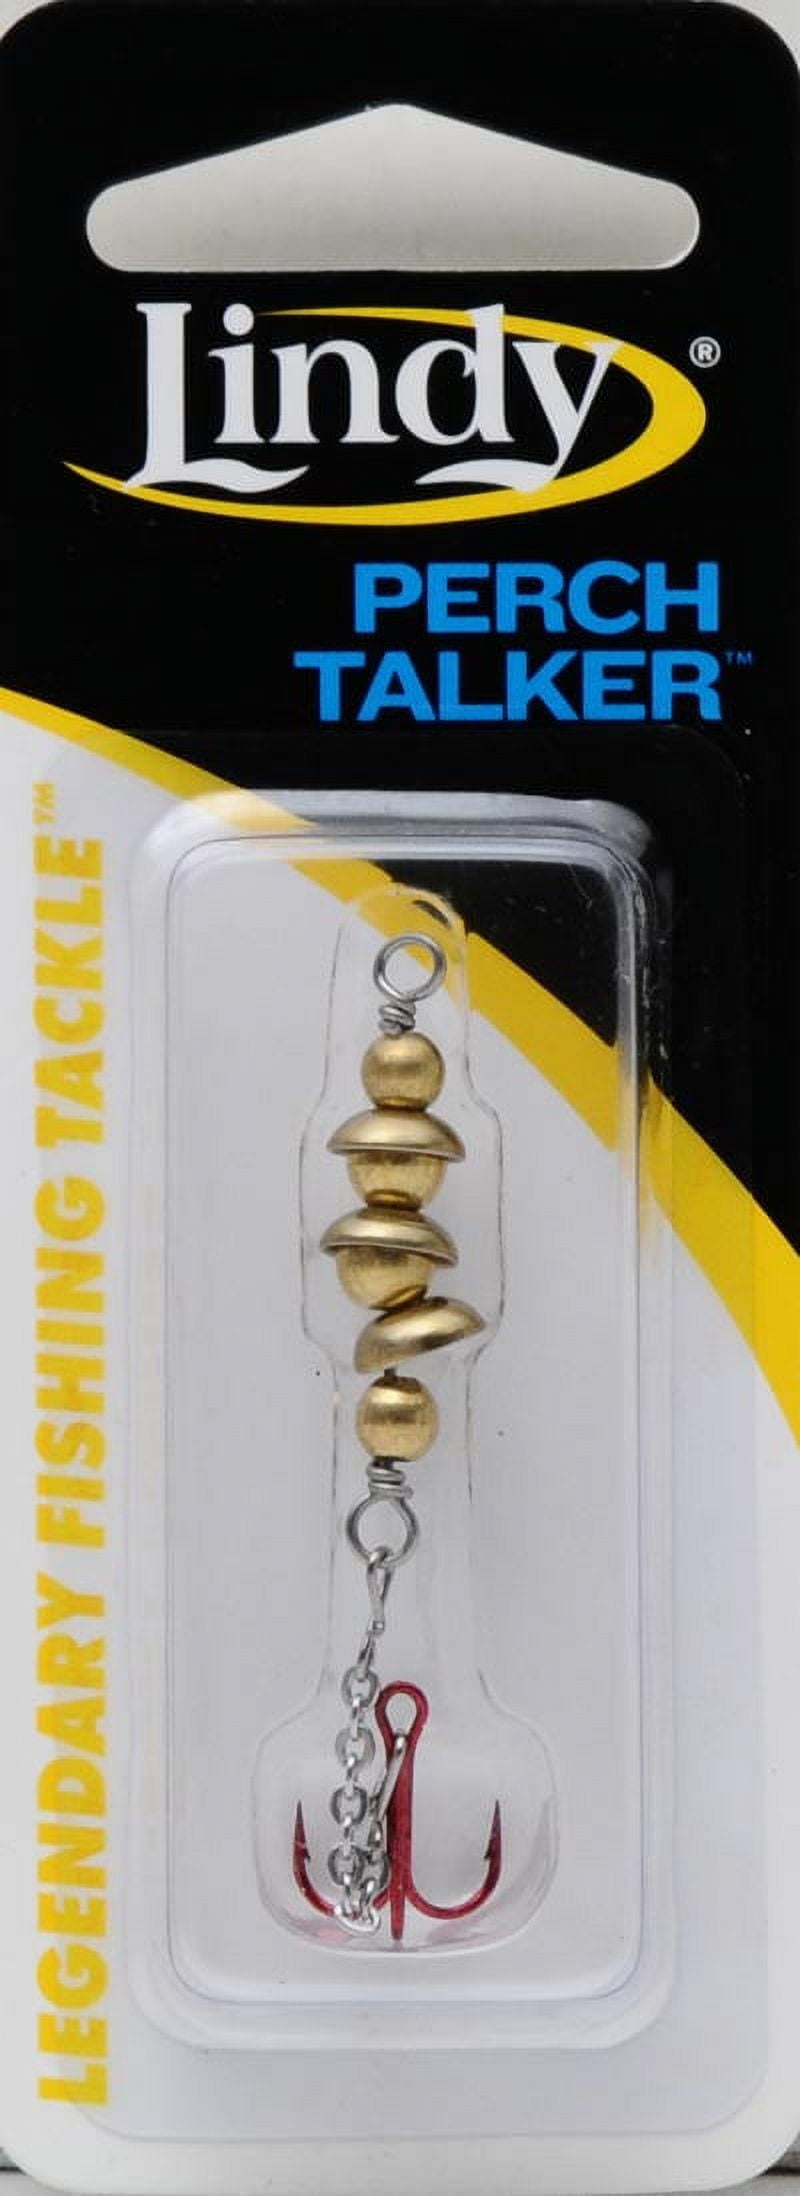 Lindy Ice Perch Talker Fishing Lure Ice Shiner 1 4/9 in.1/8 oz.